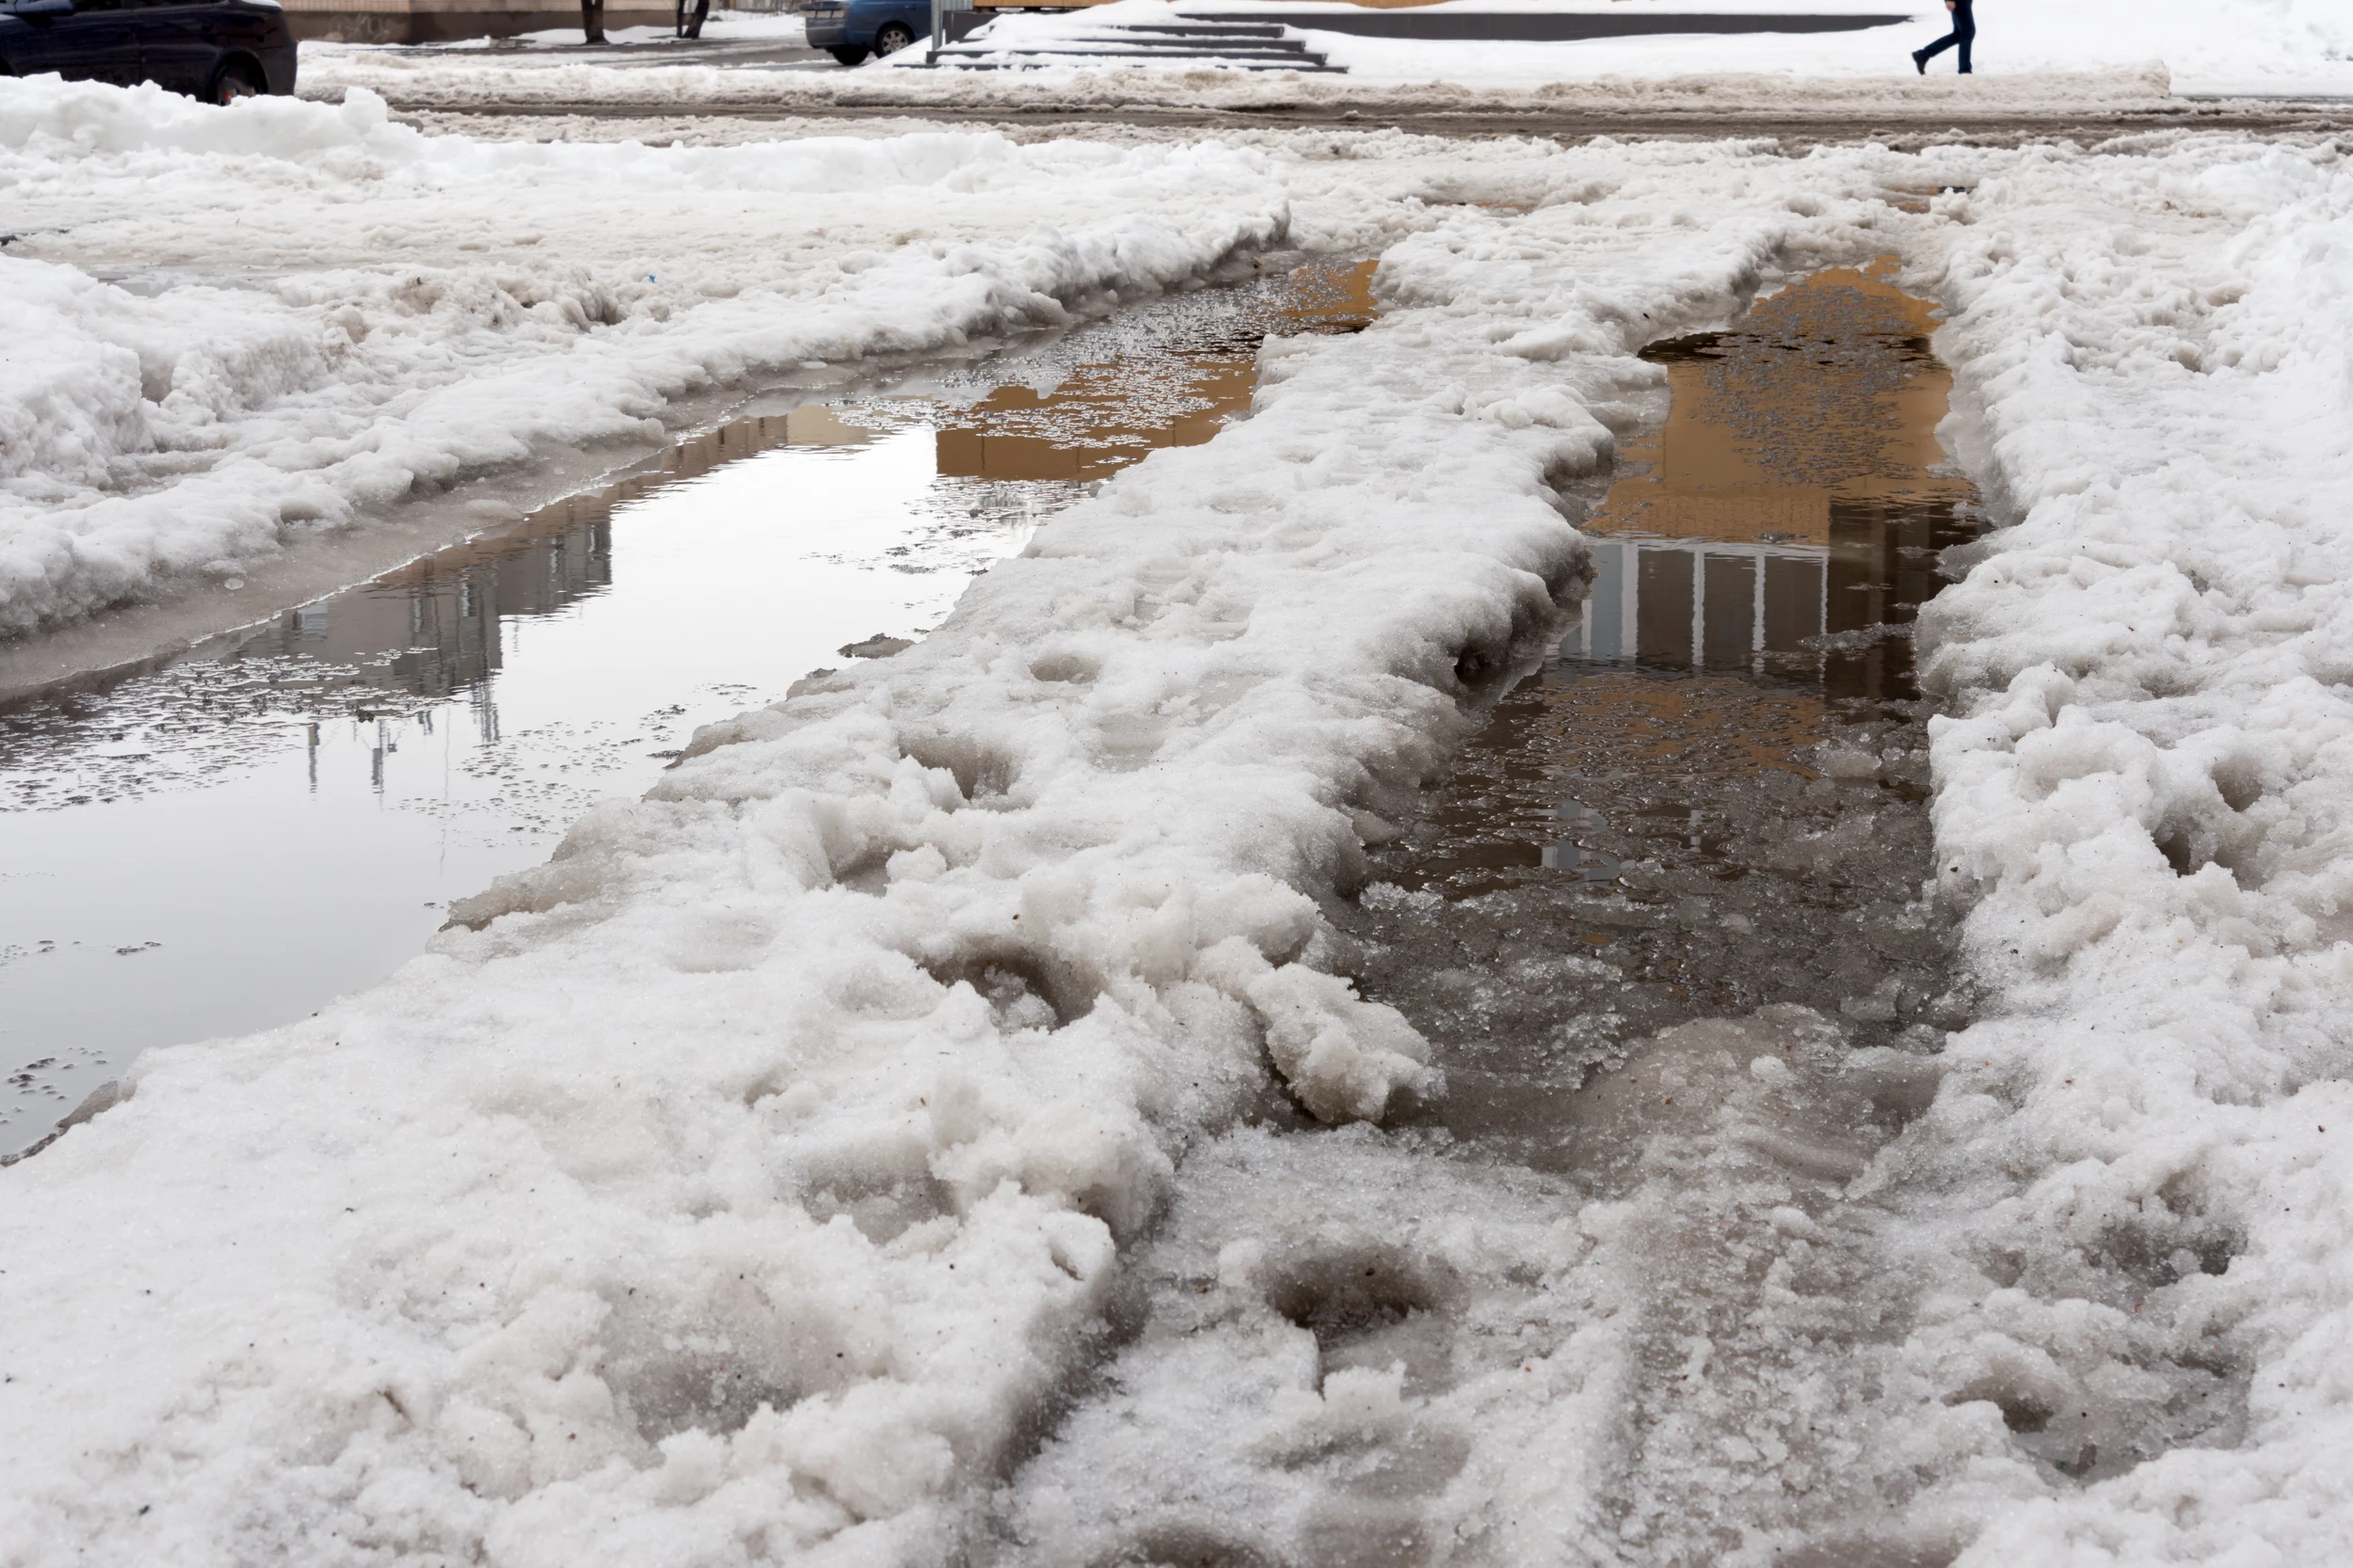 ice and snow in puddles spring. Thaw after winter in the city. Concept of bad water flow communication, deluge.